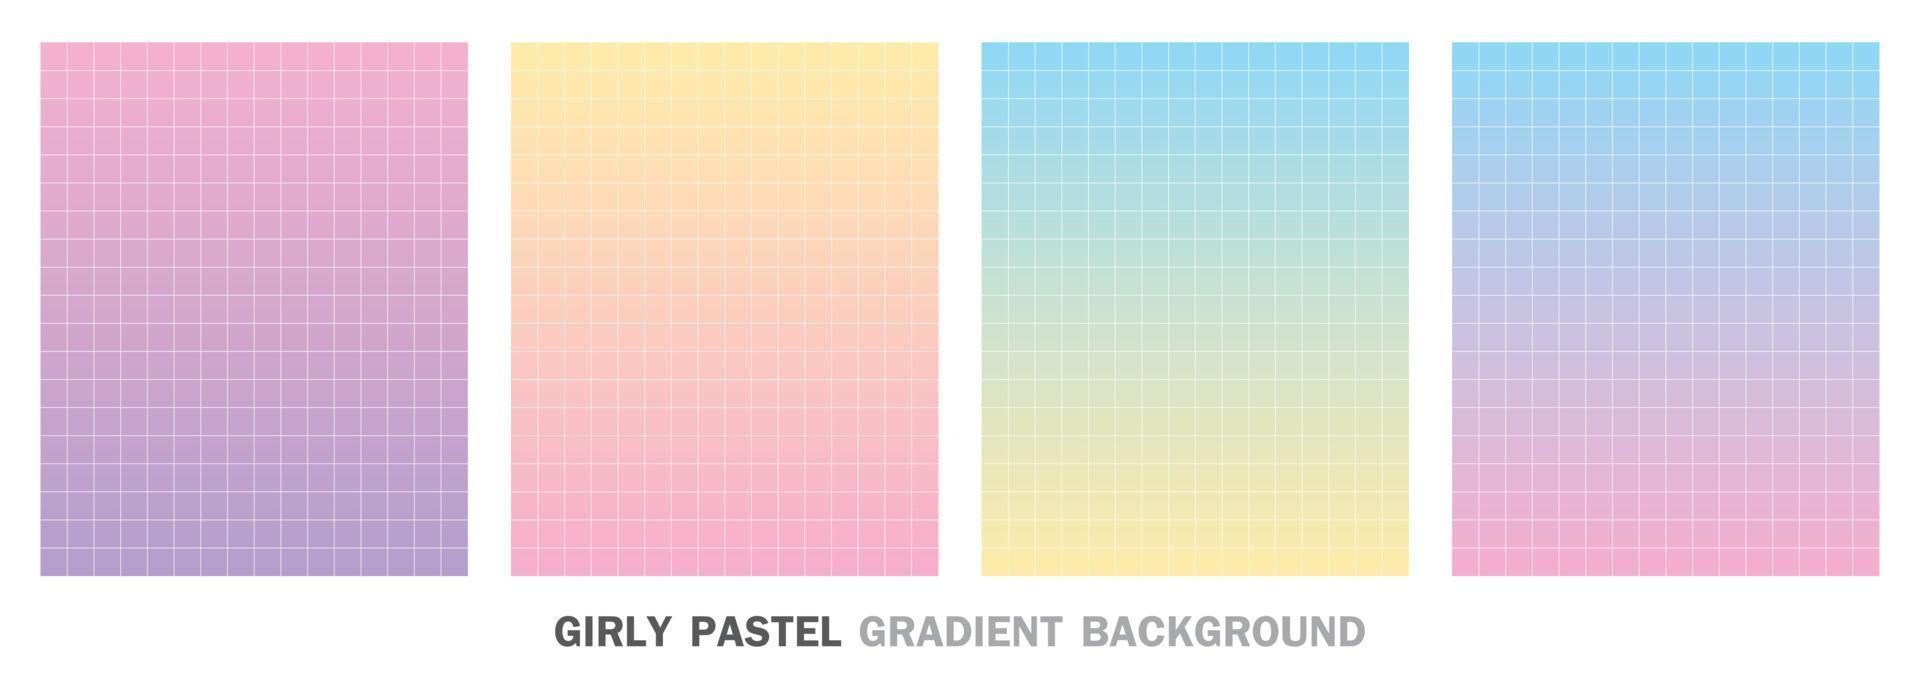 Sweet girly gradient color with grid pattern background vector set